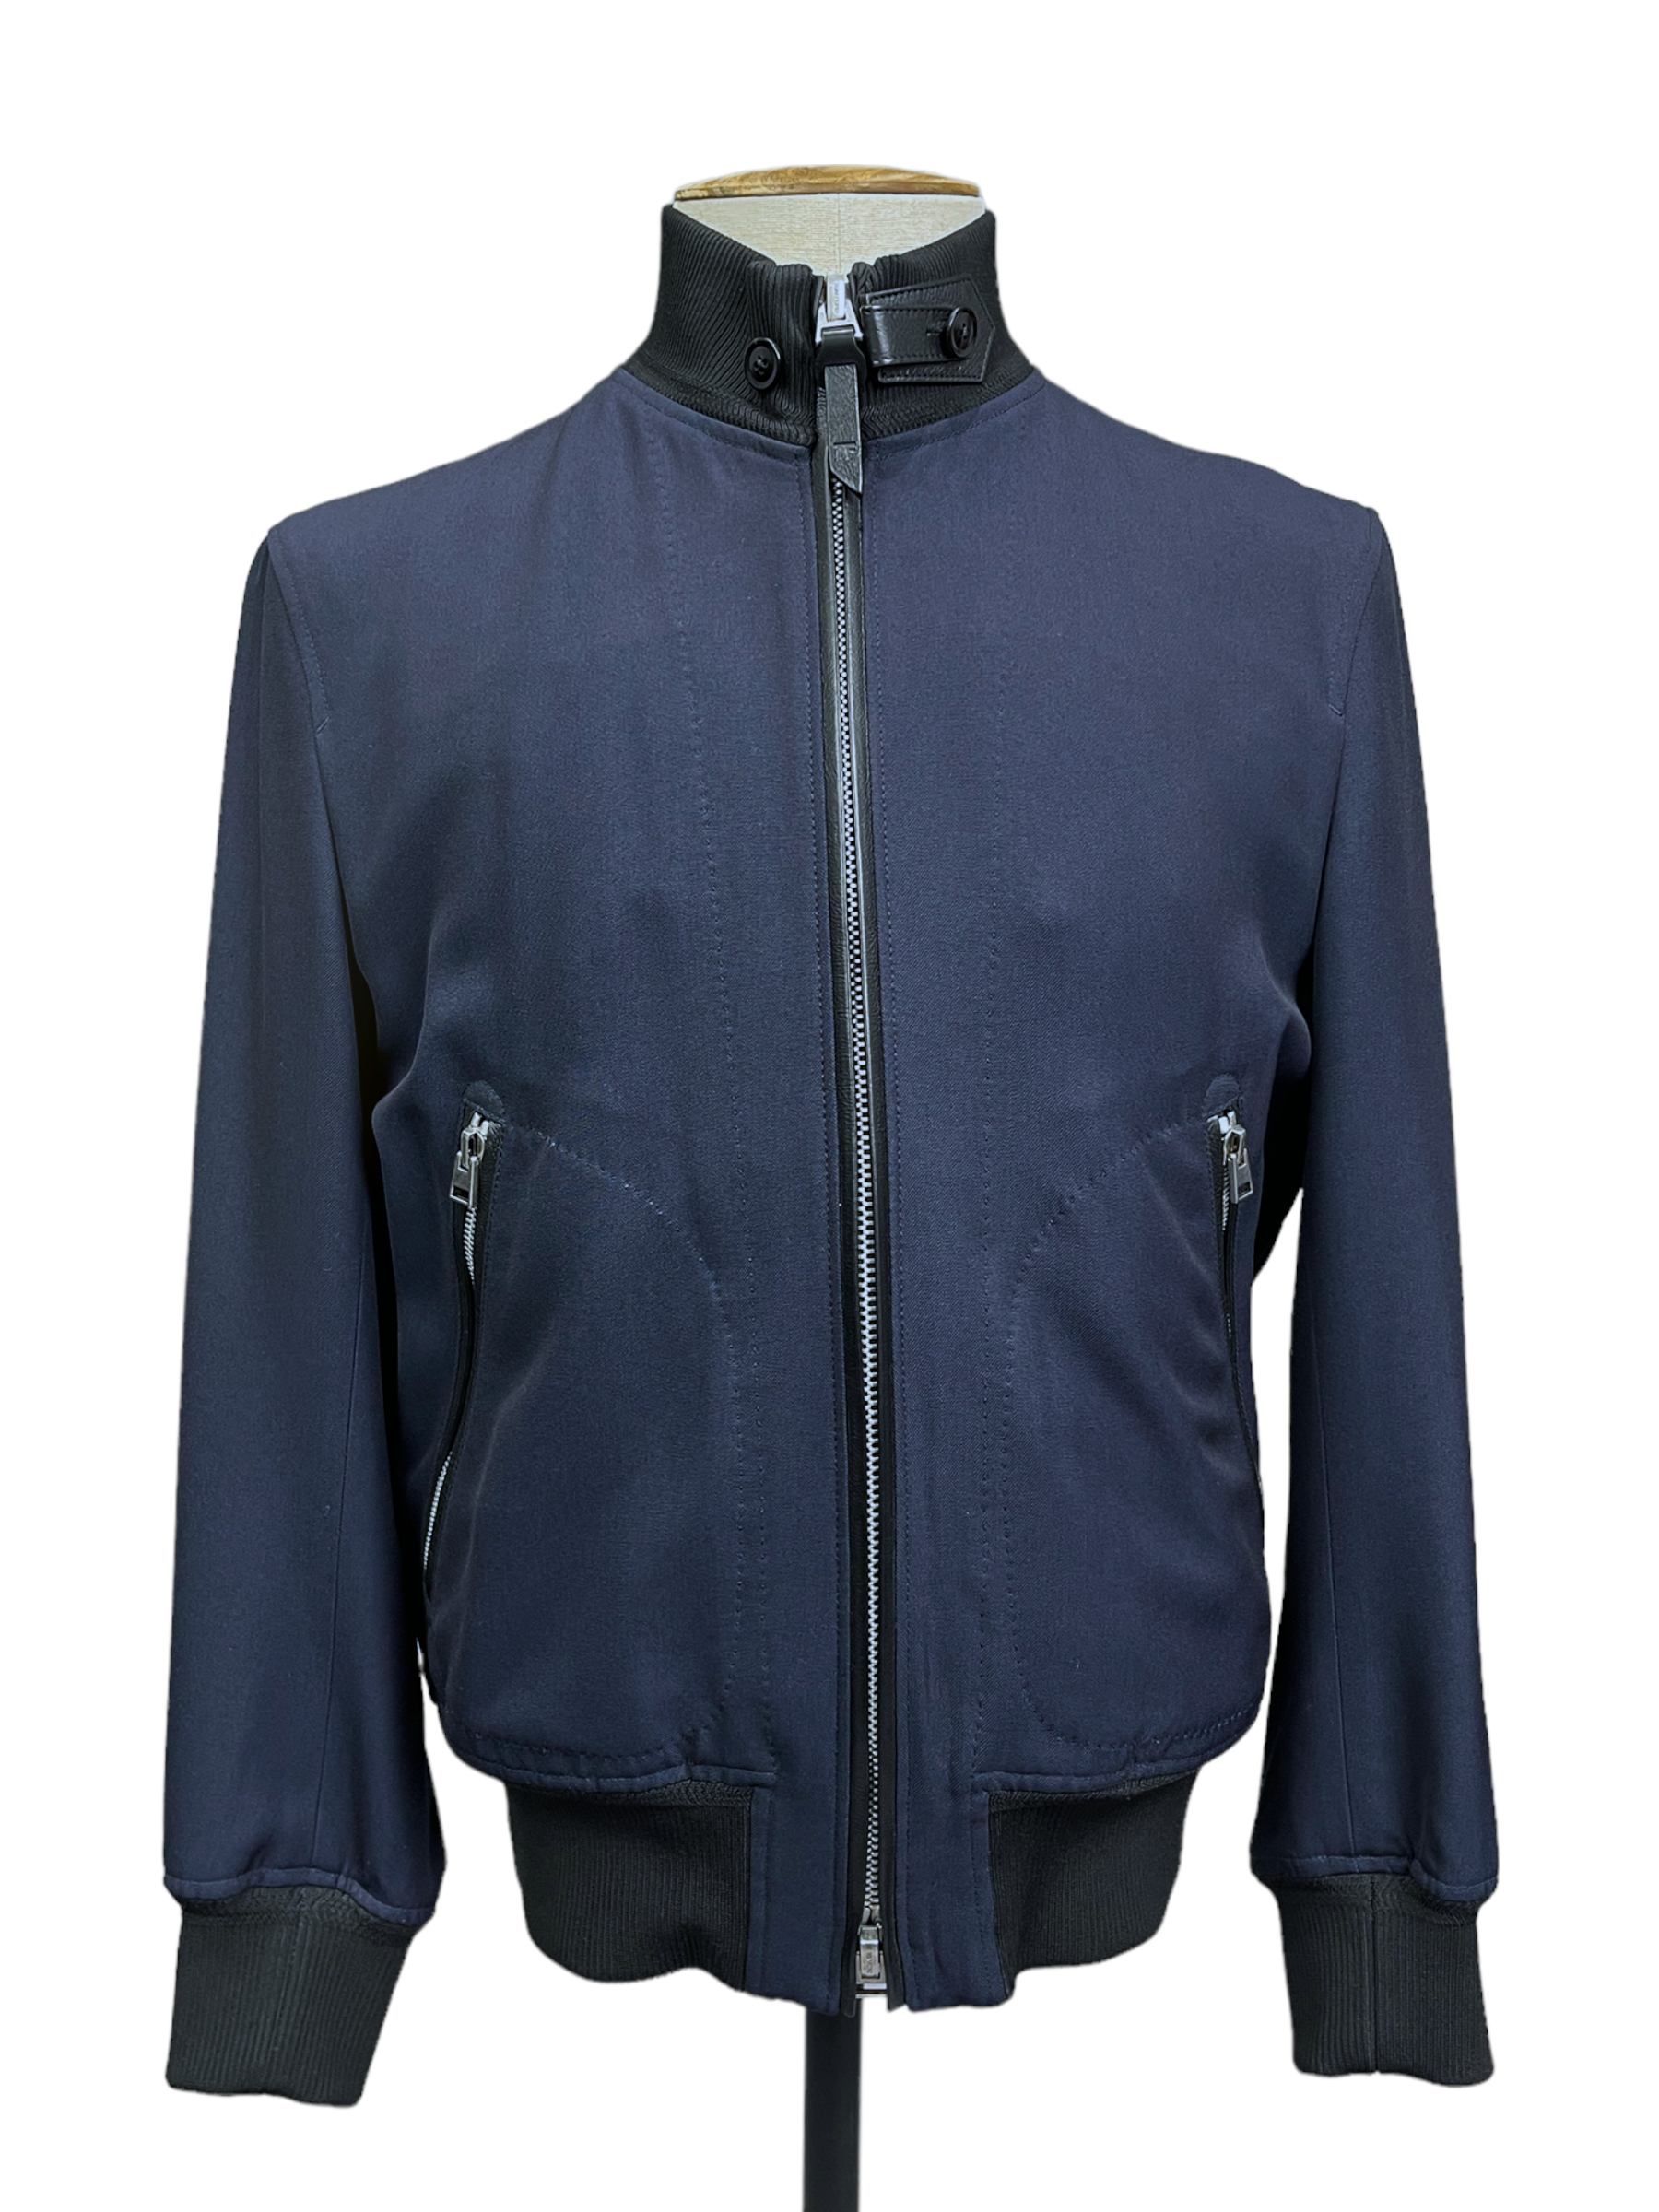 Tom Ford Navy Zip up Casual Wool Jacket 40 — Genuine Design Luxury Consignment Calgary, Alberta, Canada New and Pre-Owned Clothing, Shoes, Accessories.